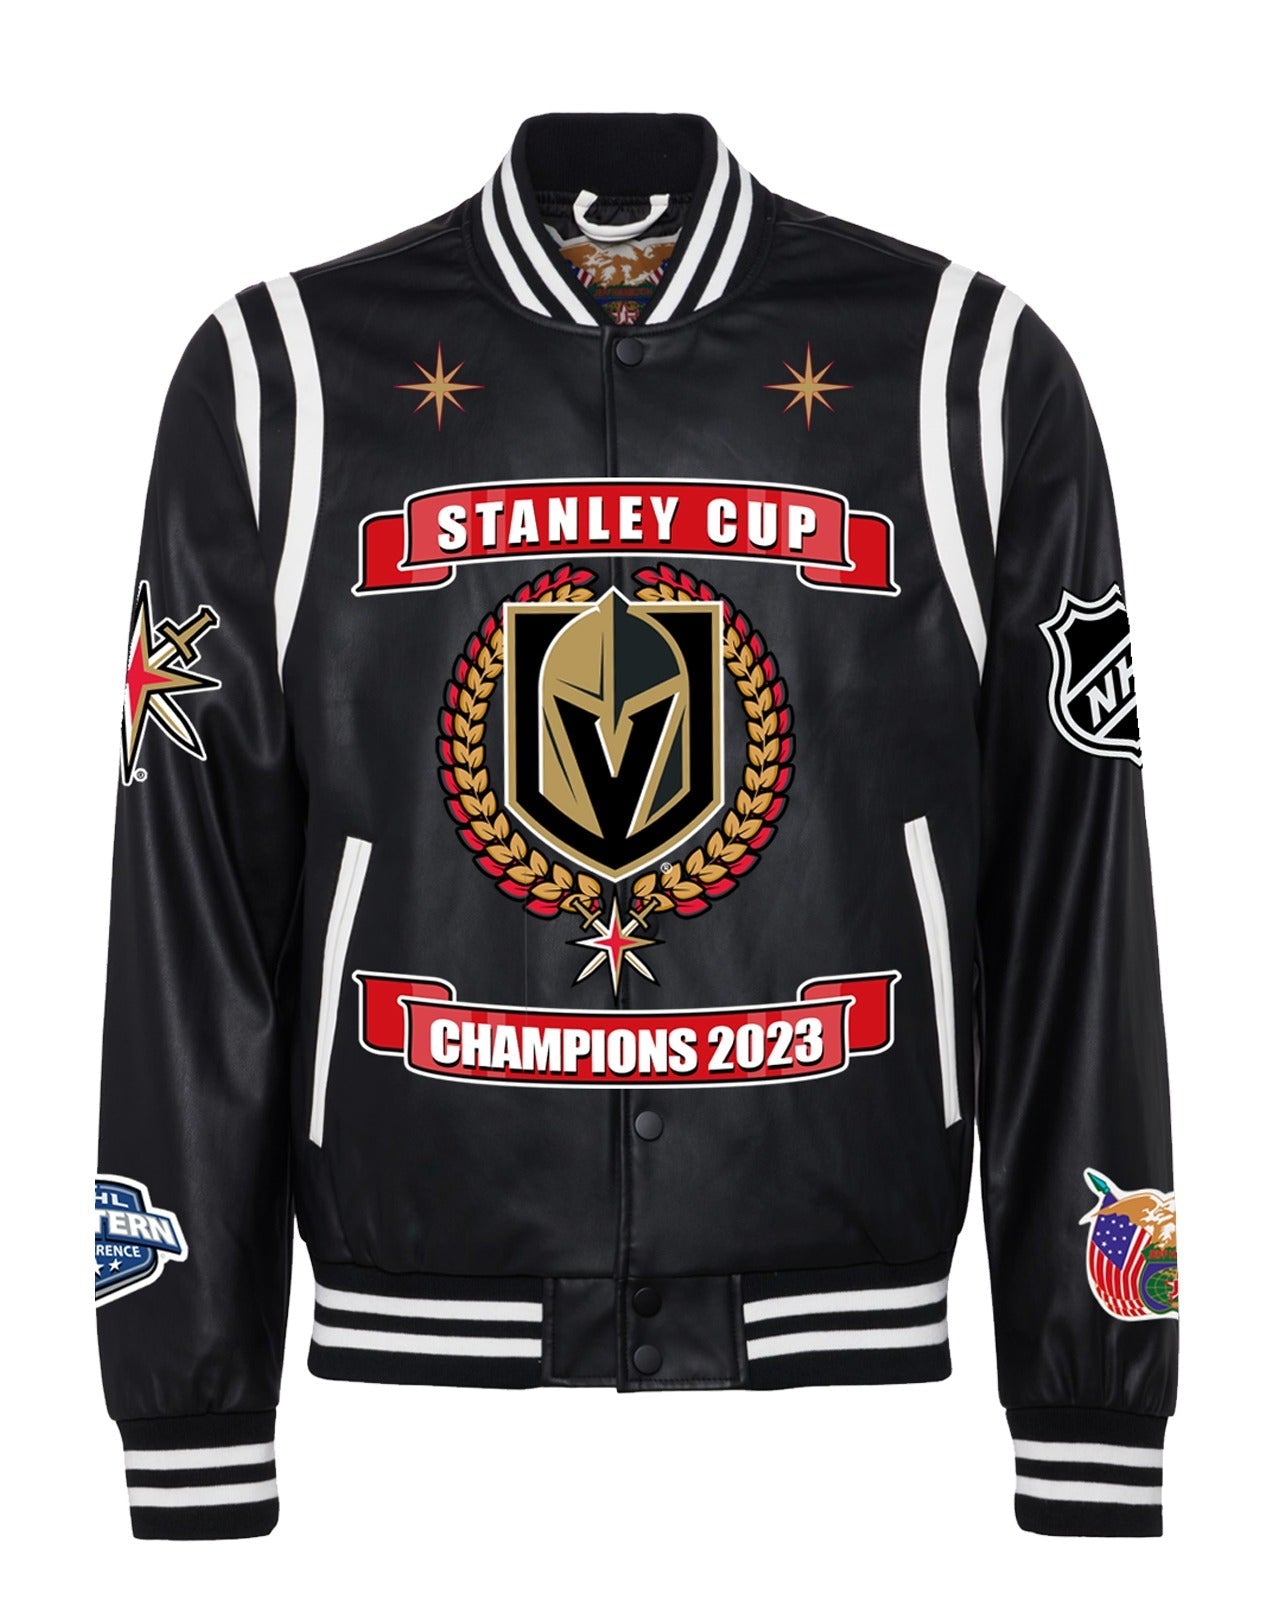 VEGAS GOLDEN KNIGHTS NHL STANLEY CUP CHAMPIONS VEGAN LEATHER JACKET